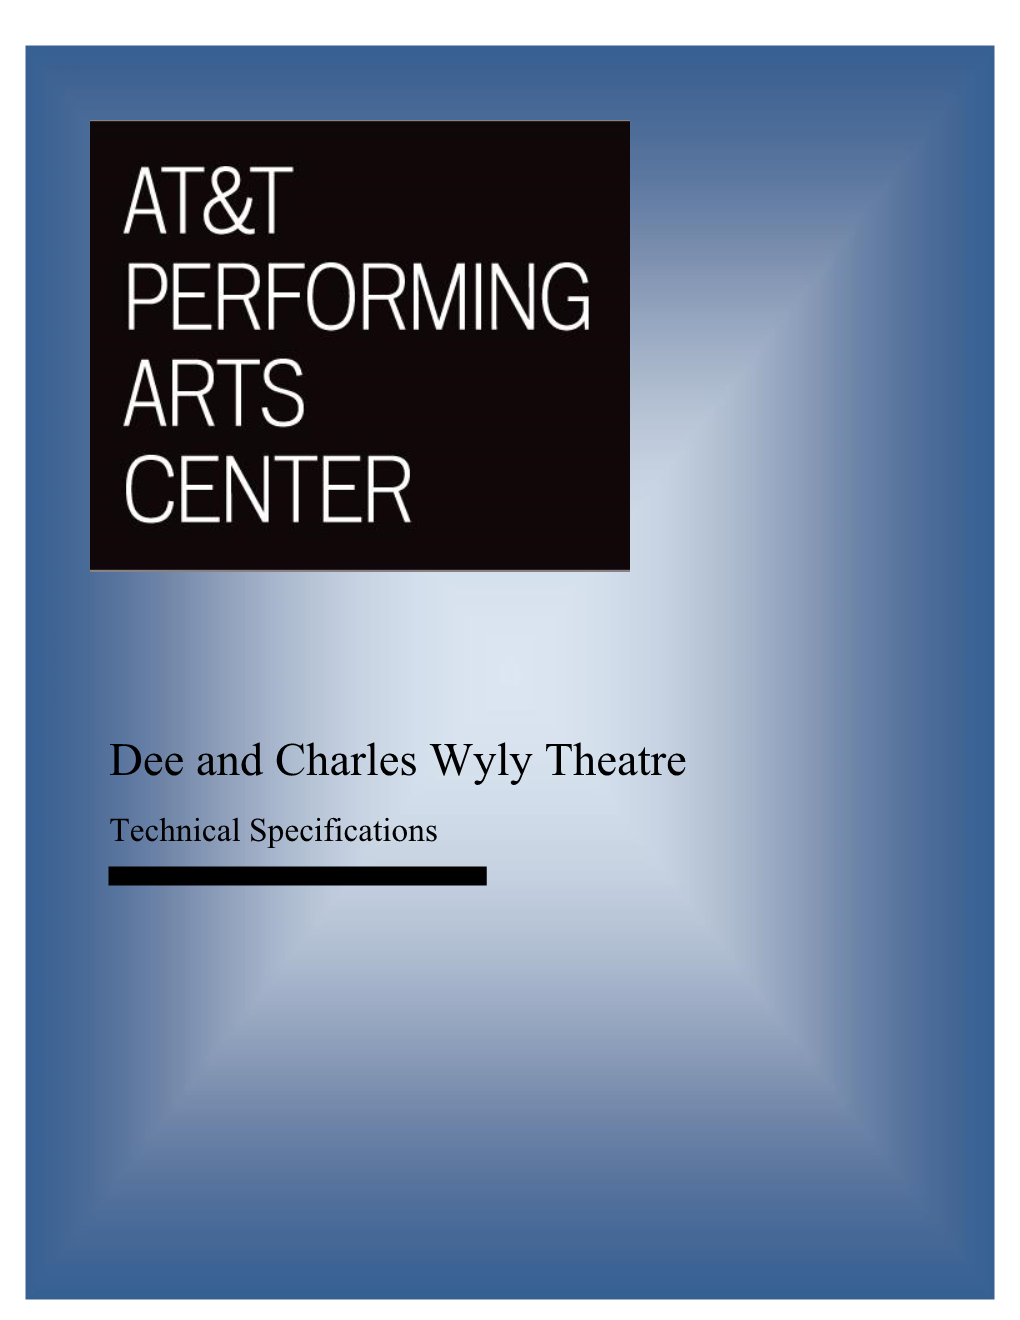 Dee and Charles Wyly Theatre Technical Specifications